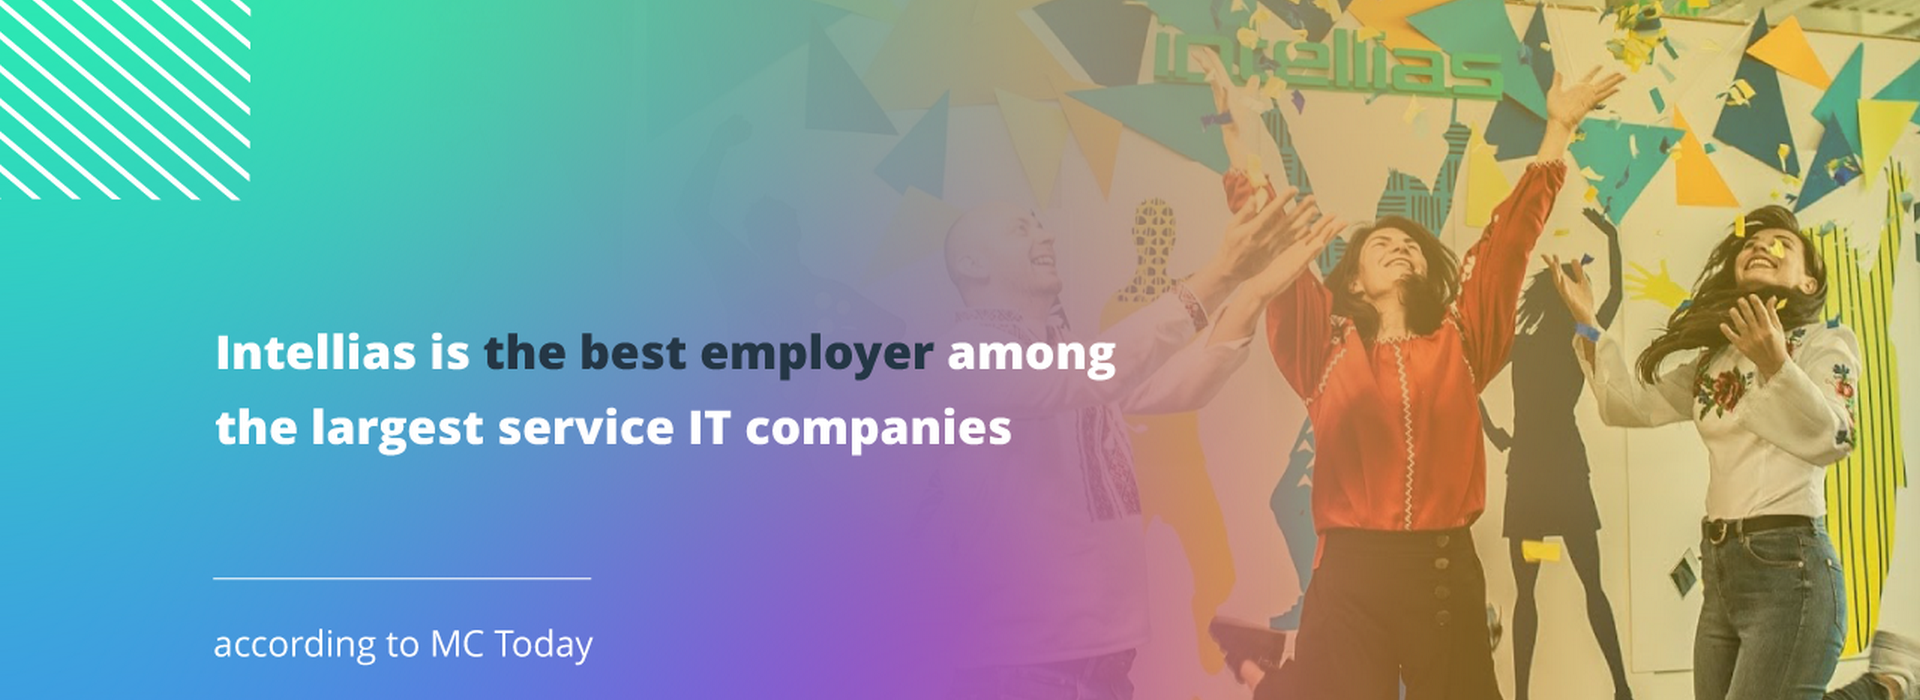 Intellias Is the Best Employer Among the Largest IT Services Companies, According to MC Today